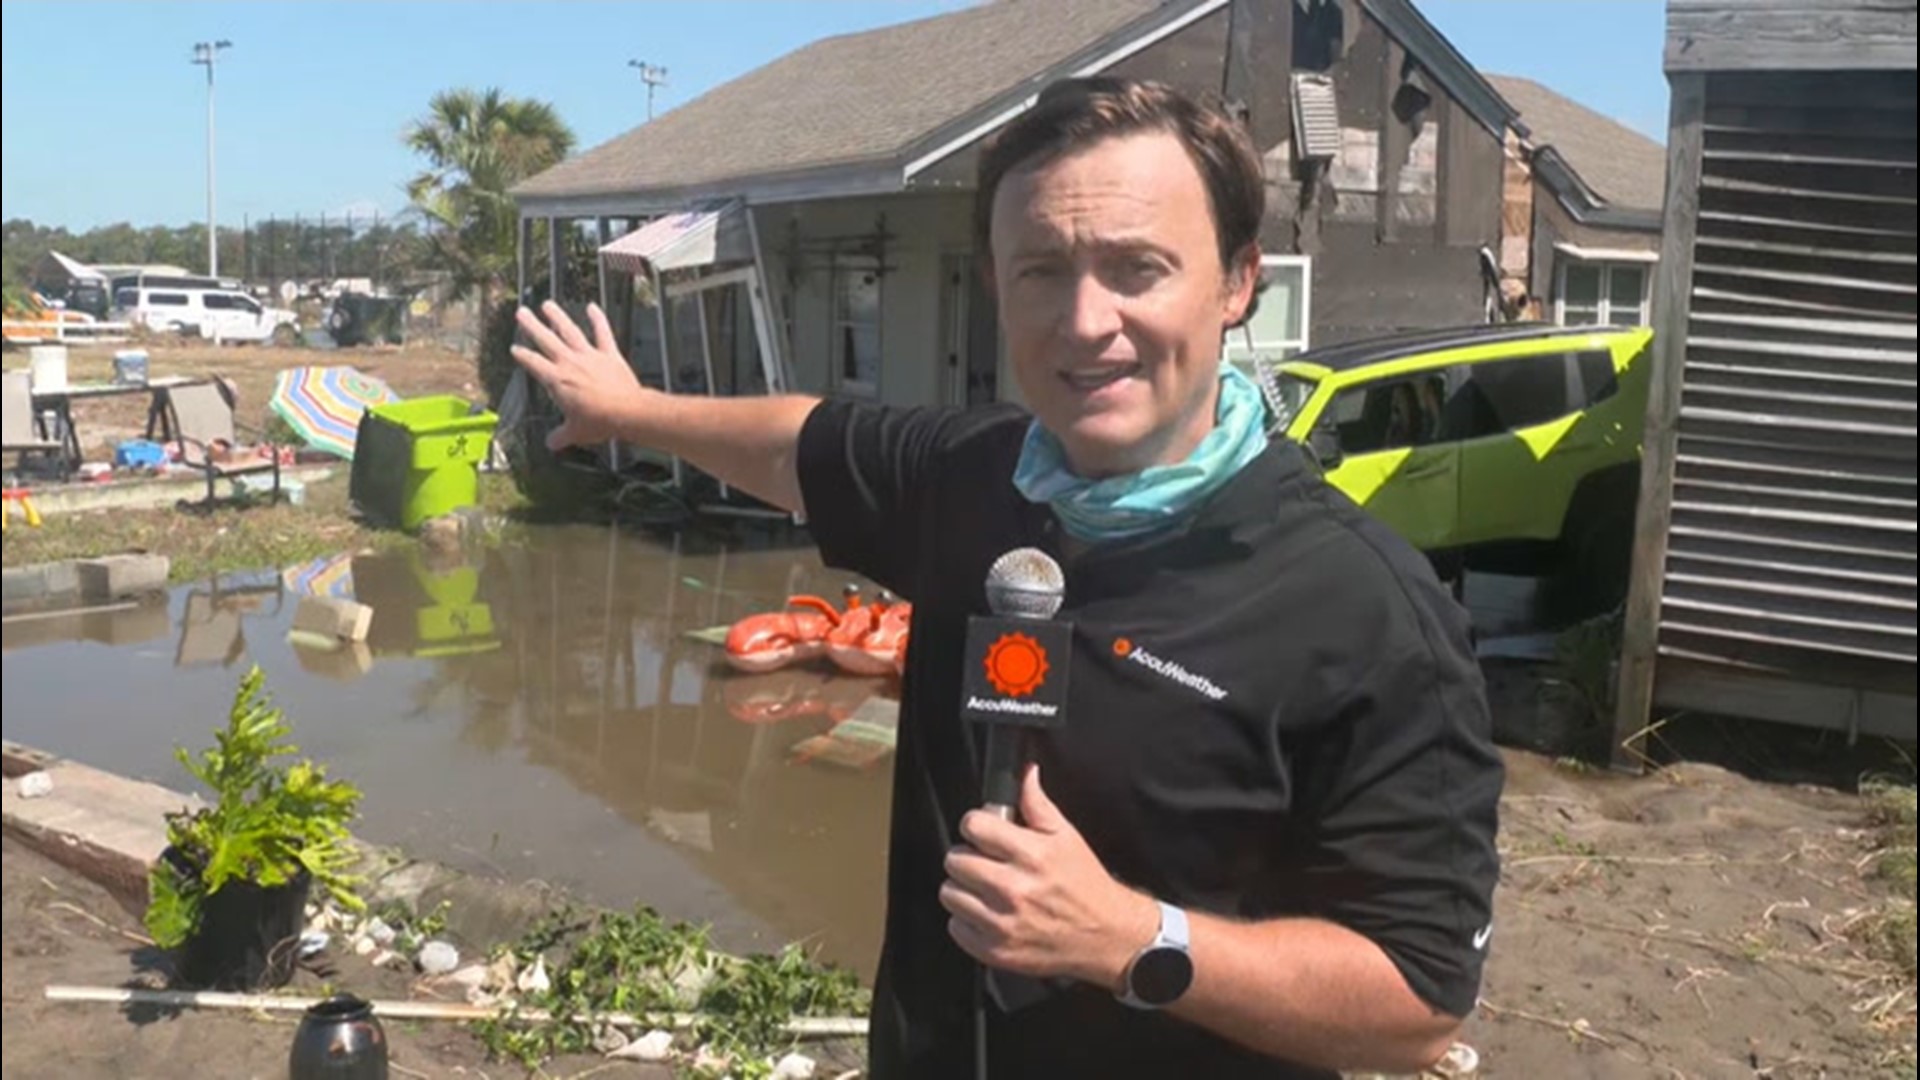 Jonathan Petramala reports on the devastation on Aug. 4, left behind by Isaias, which made landfall at Oak Island, North Carolina, as a Category 1 hurricane.